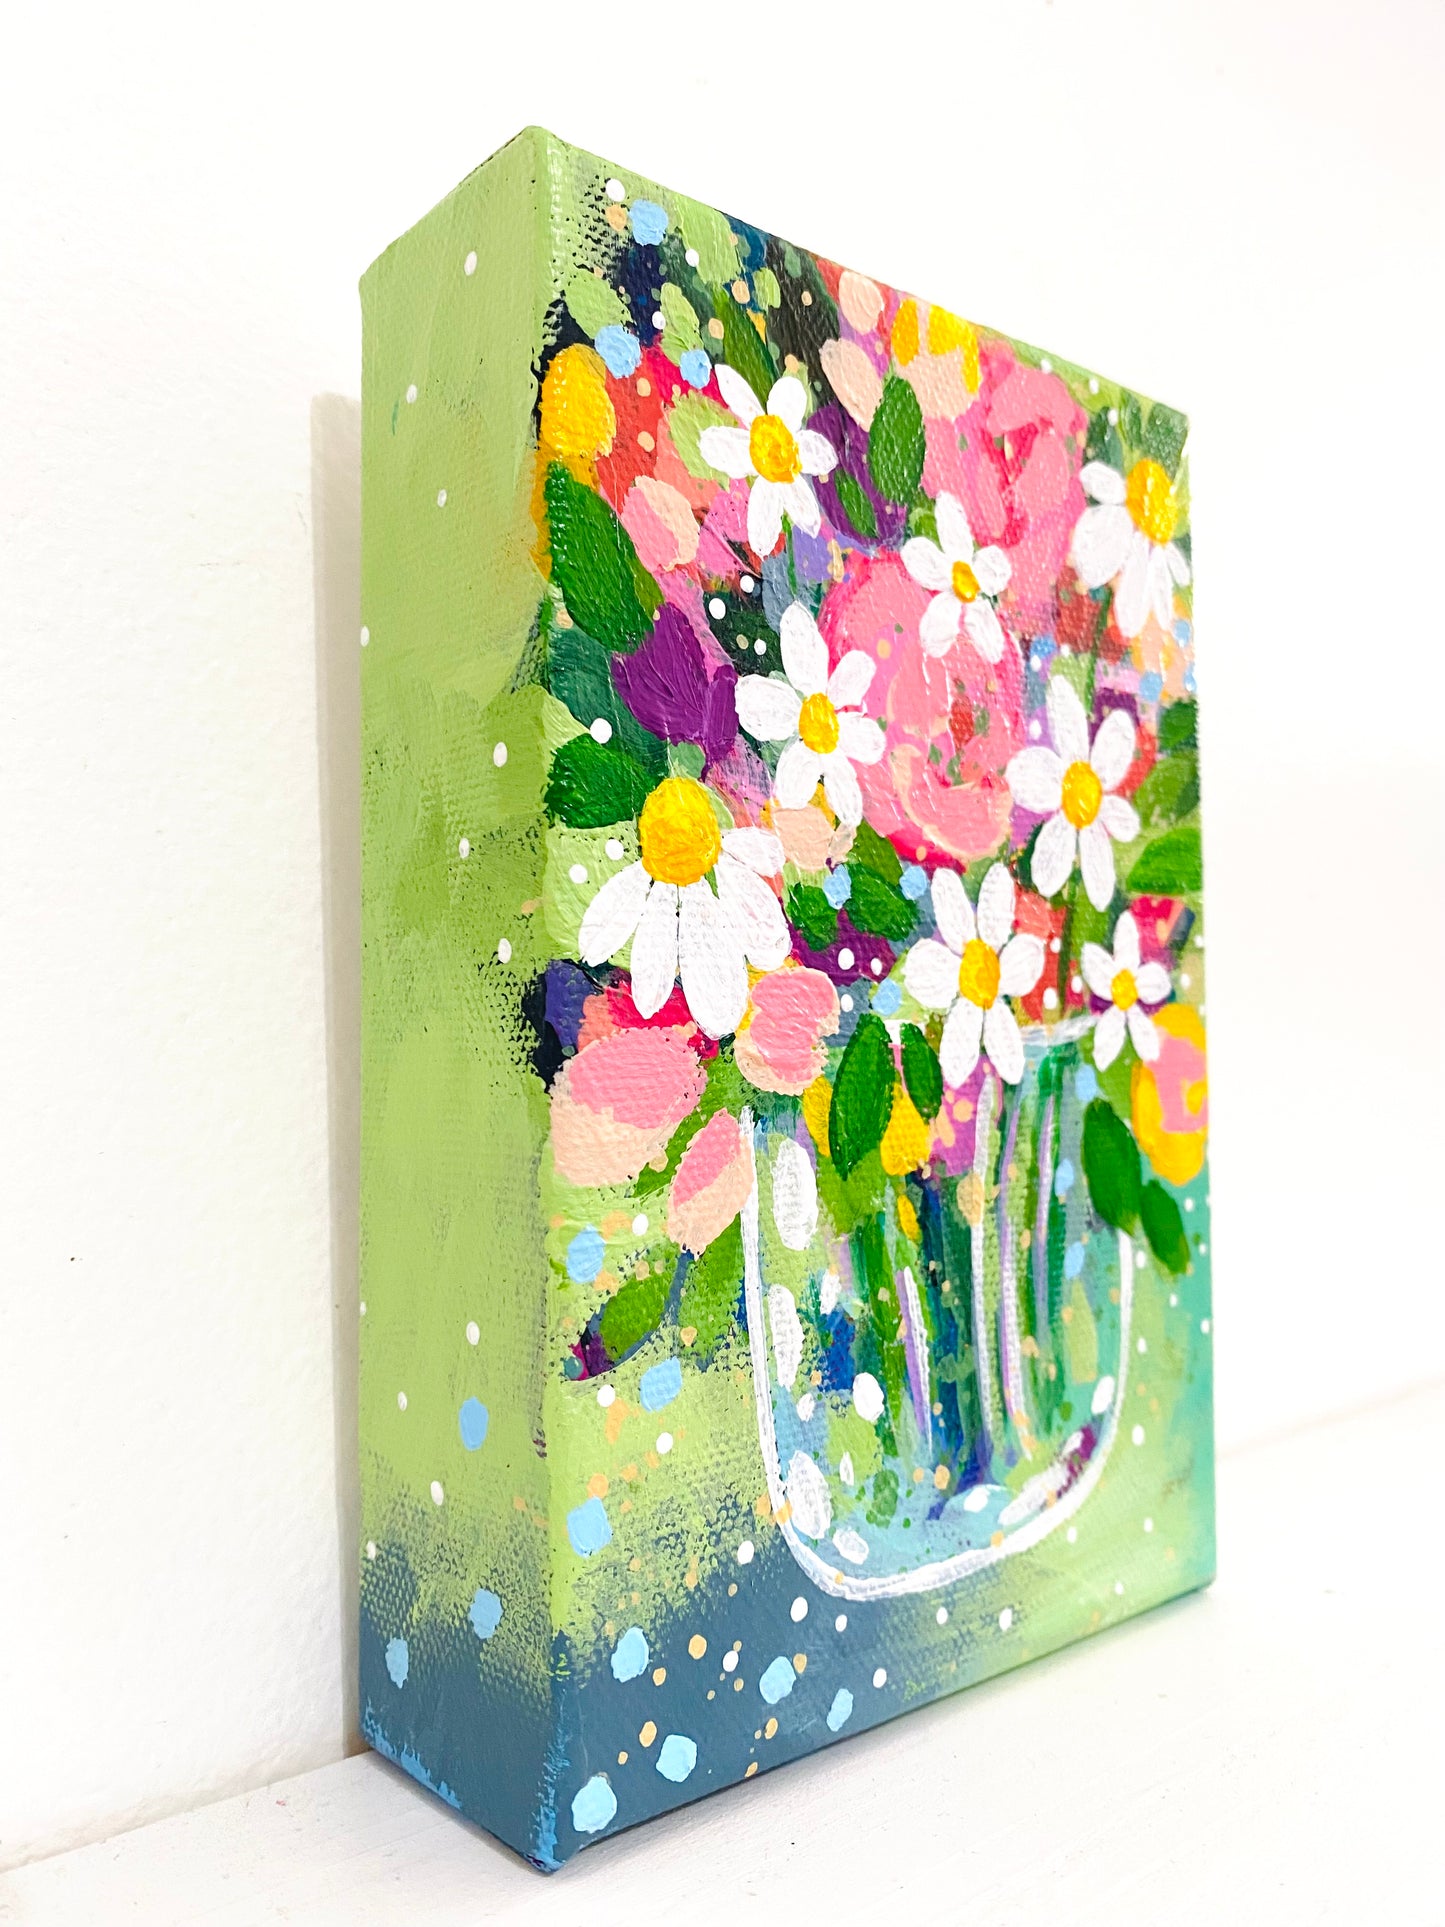 Floral Original Painting "Love Grows Here Bouquet" 4x6 inch canvas